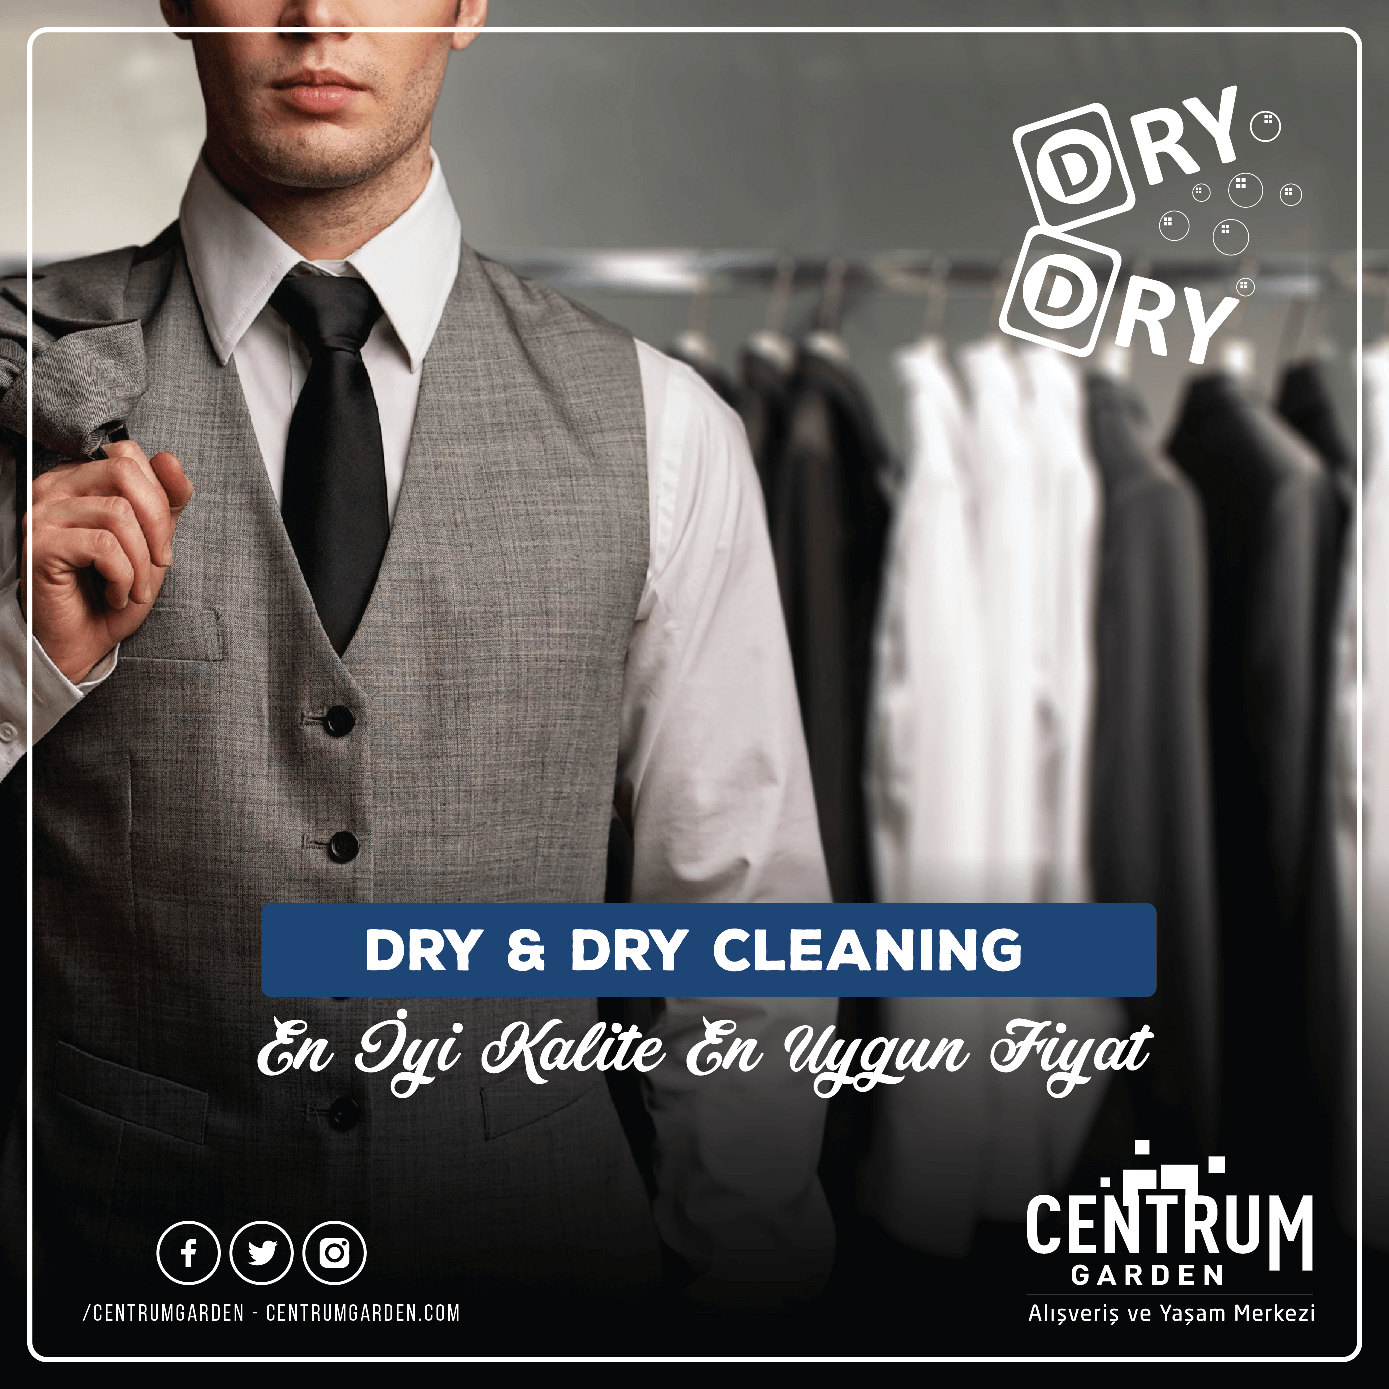 Dry & Dry Cleaning